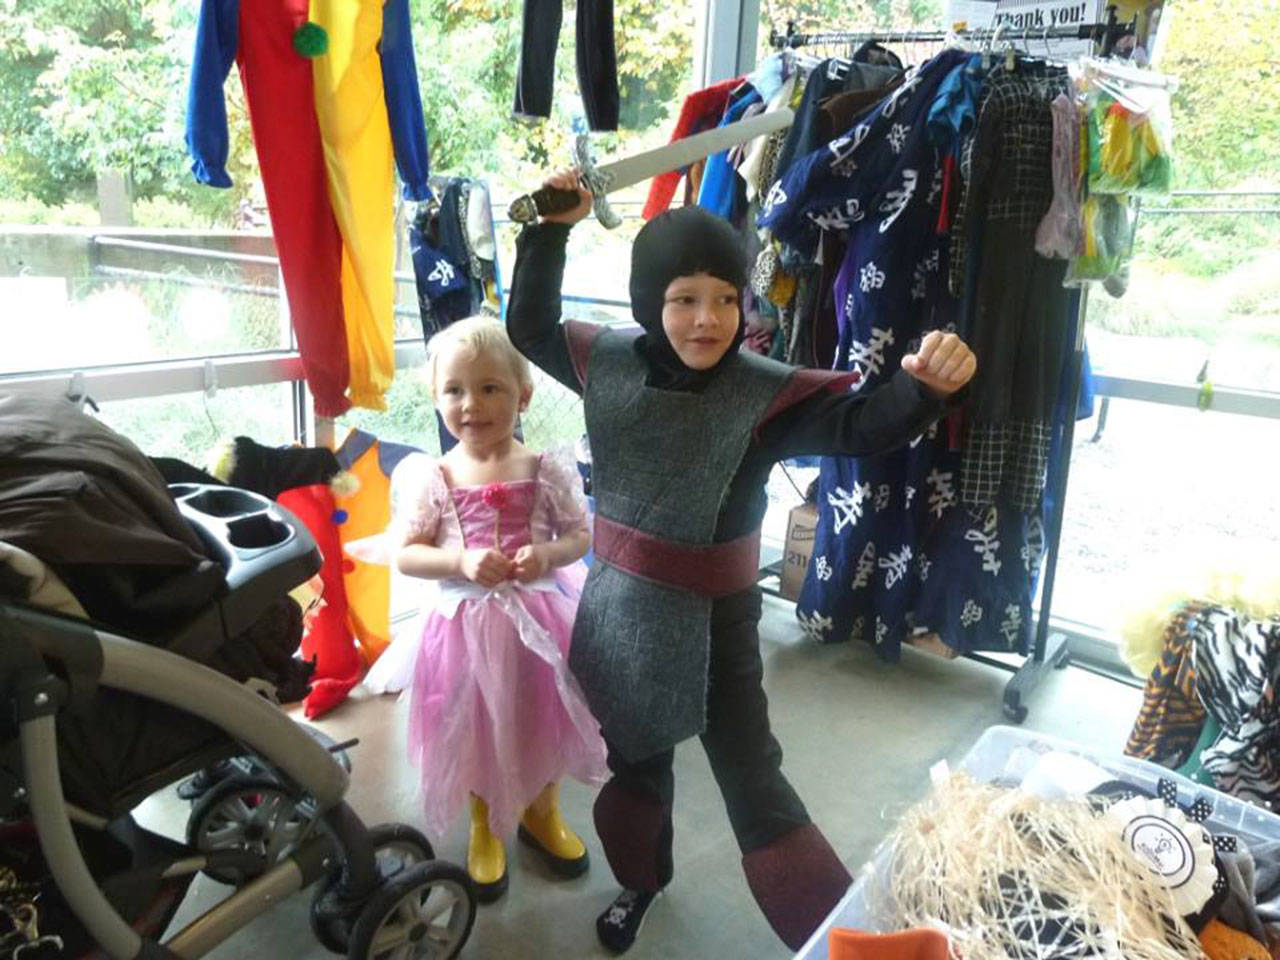 Costume swap is underway at Kids Discovery Museum